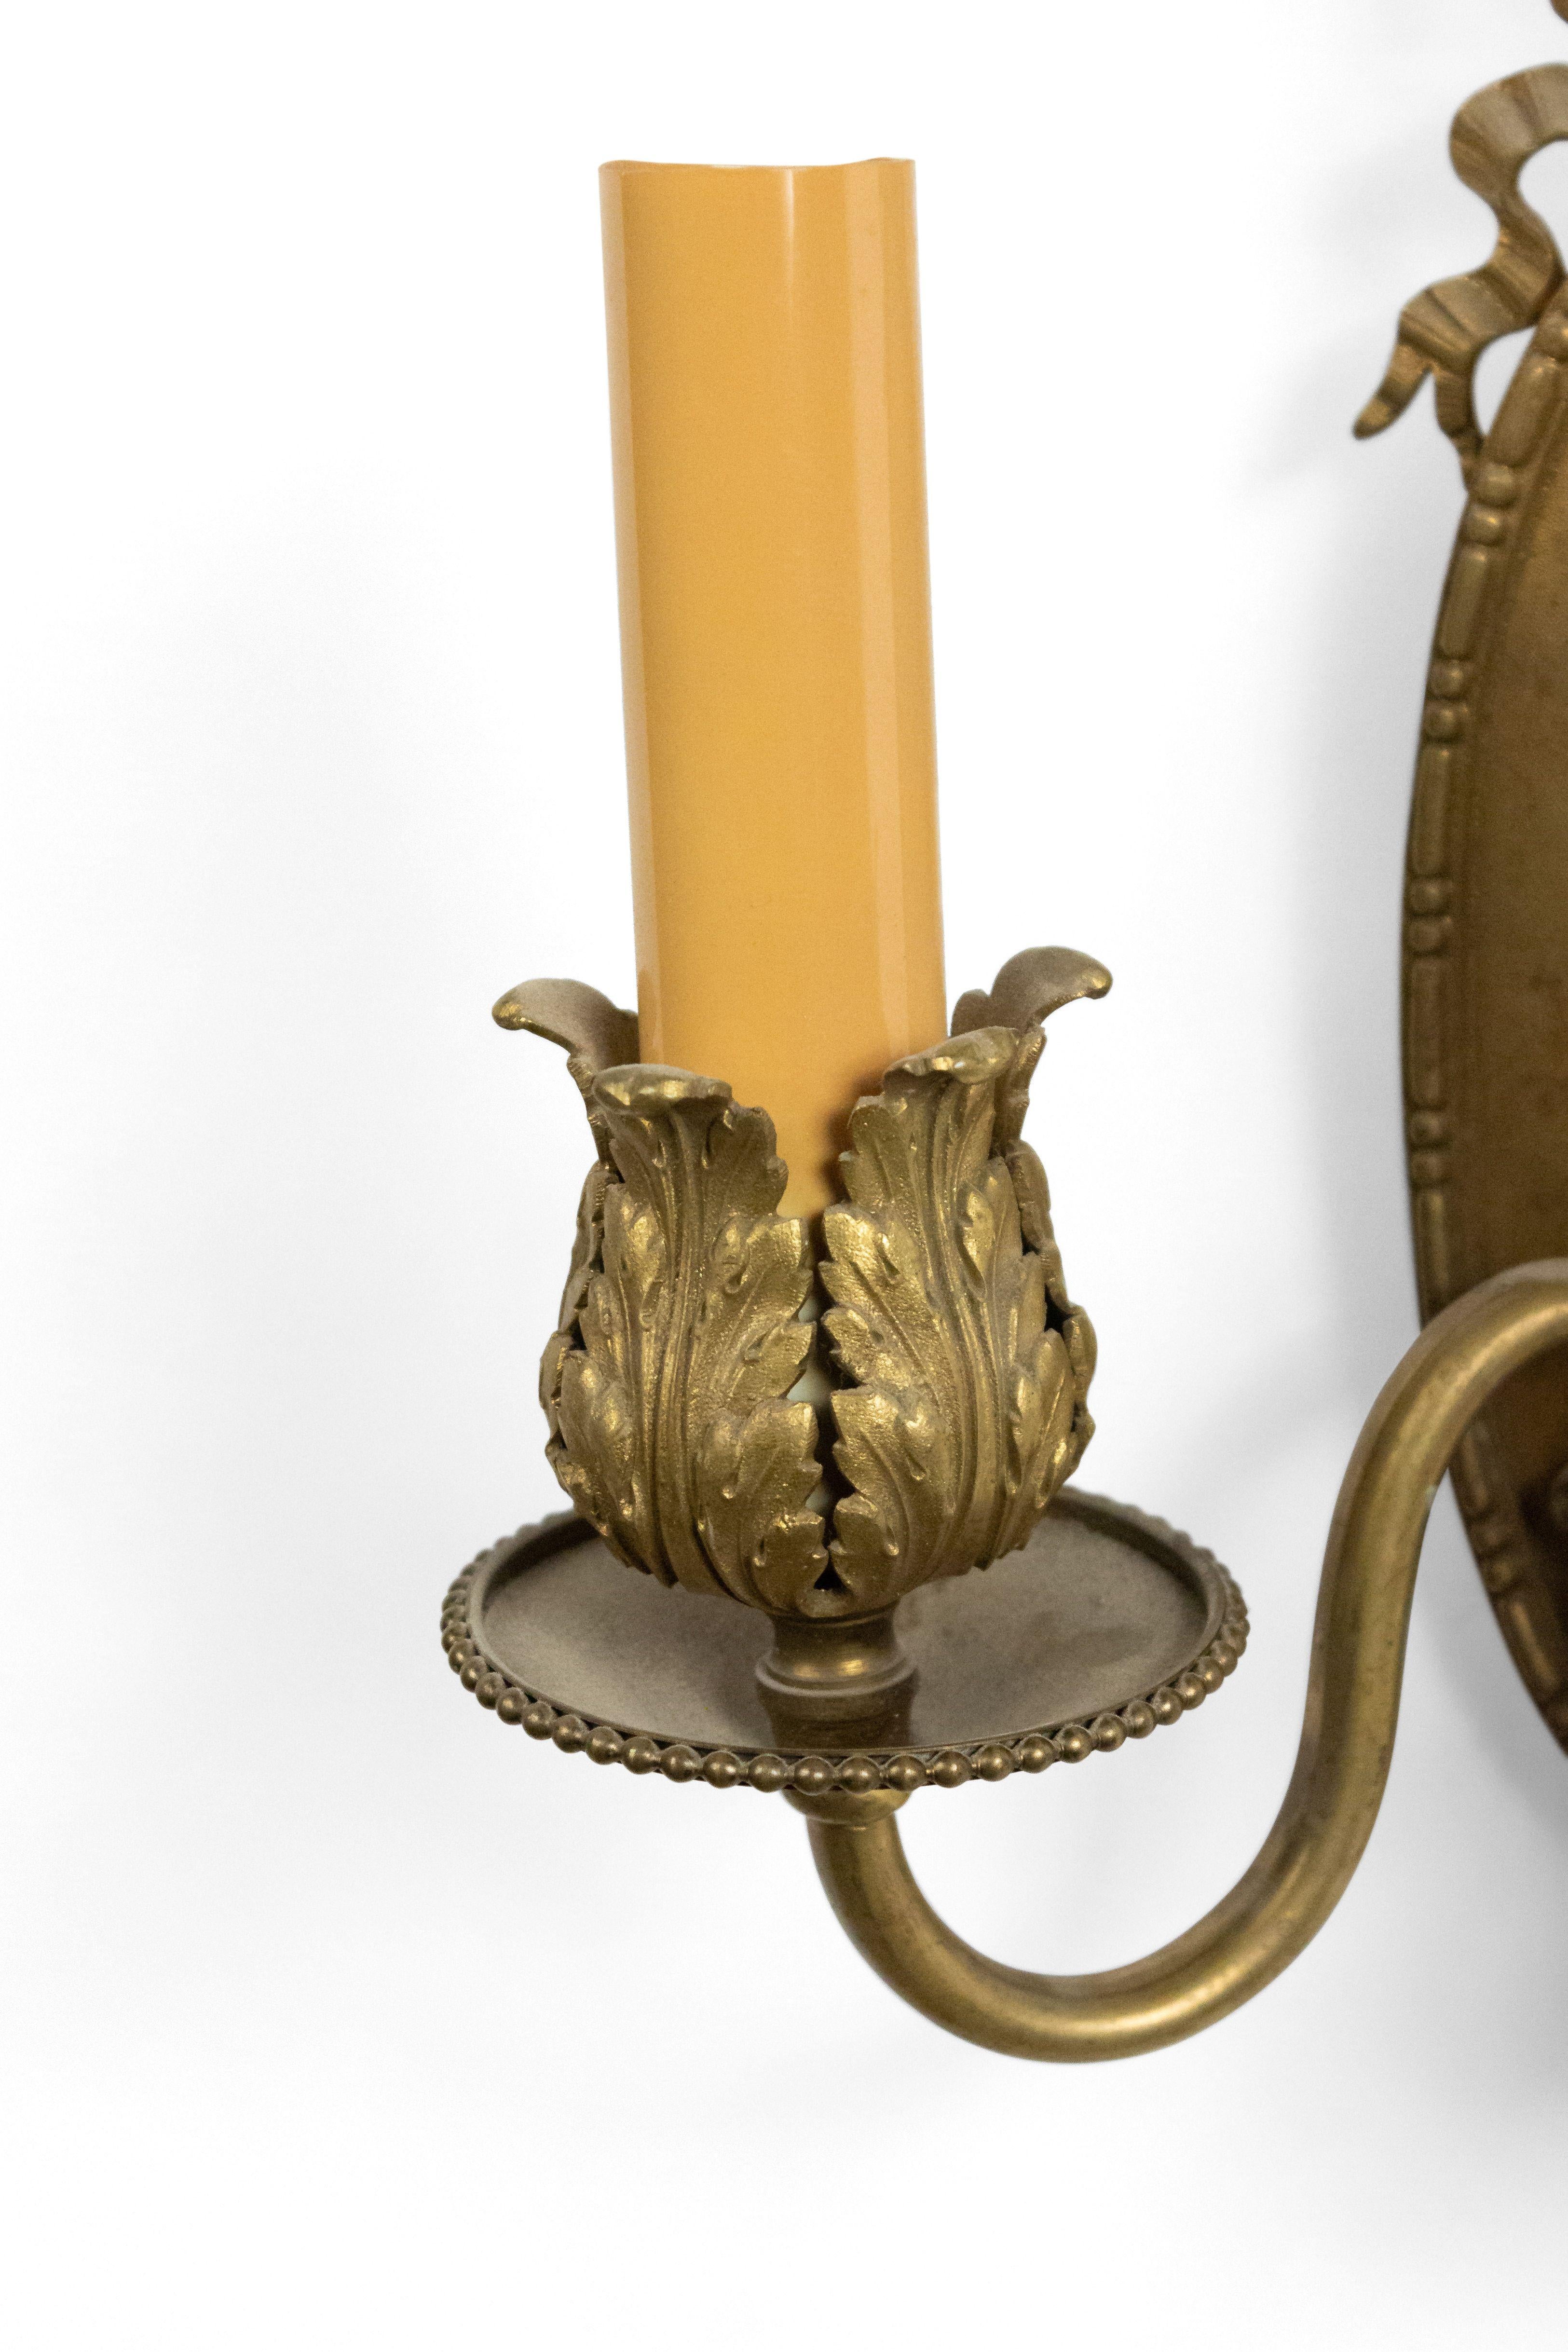 Pair of French Louis XVI style (20th century) bronze doré oval back 2-arm wall sconces with bow knot top.